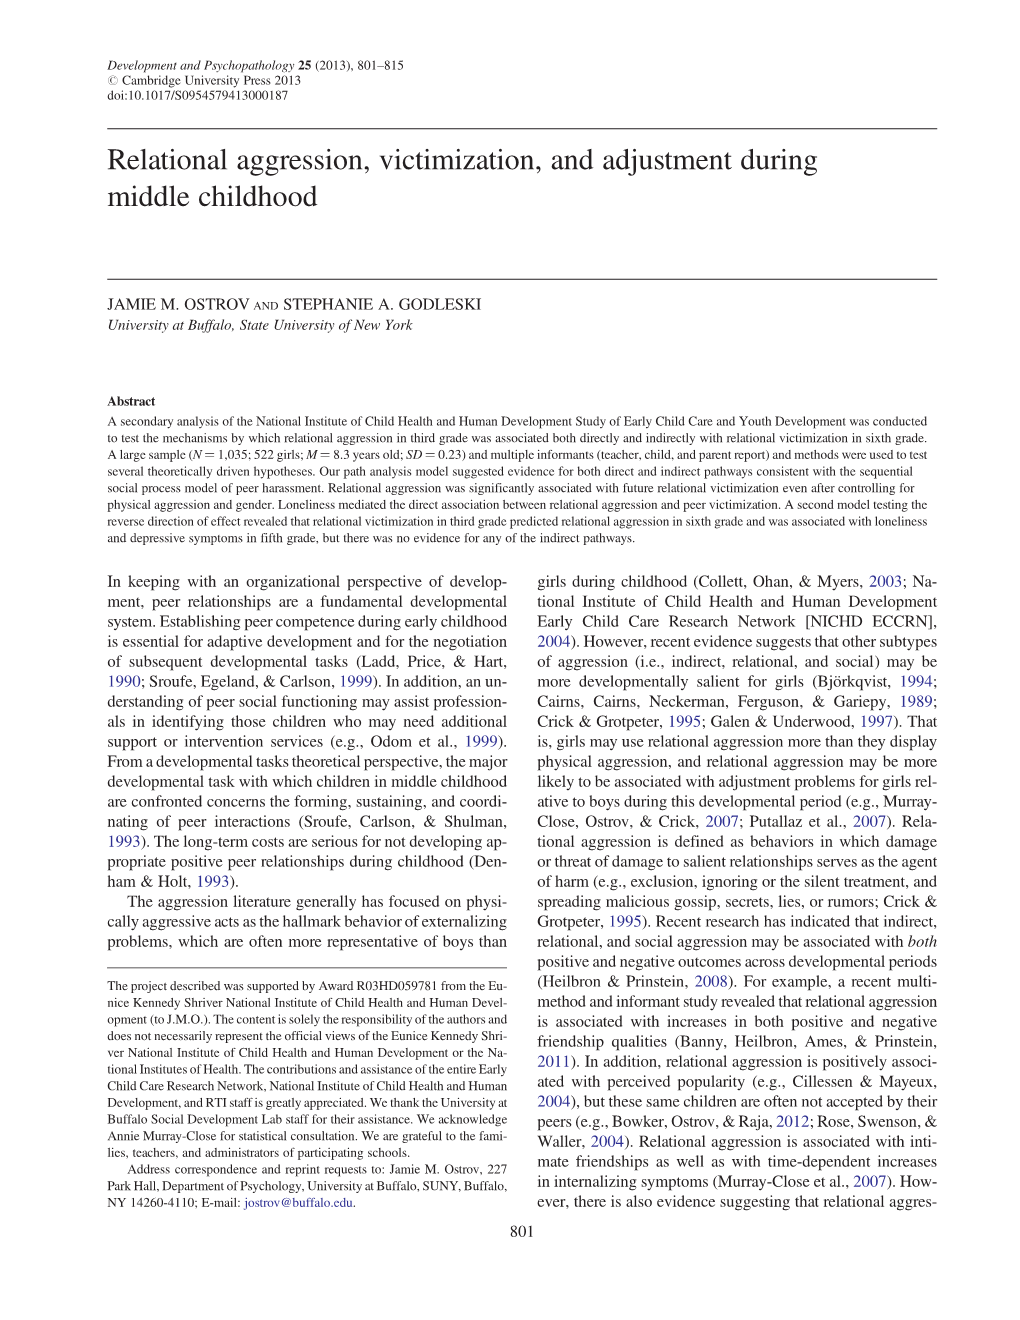 Relational Aggression, Victimization, and Adjustment During Middle Childhood